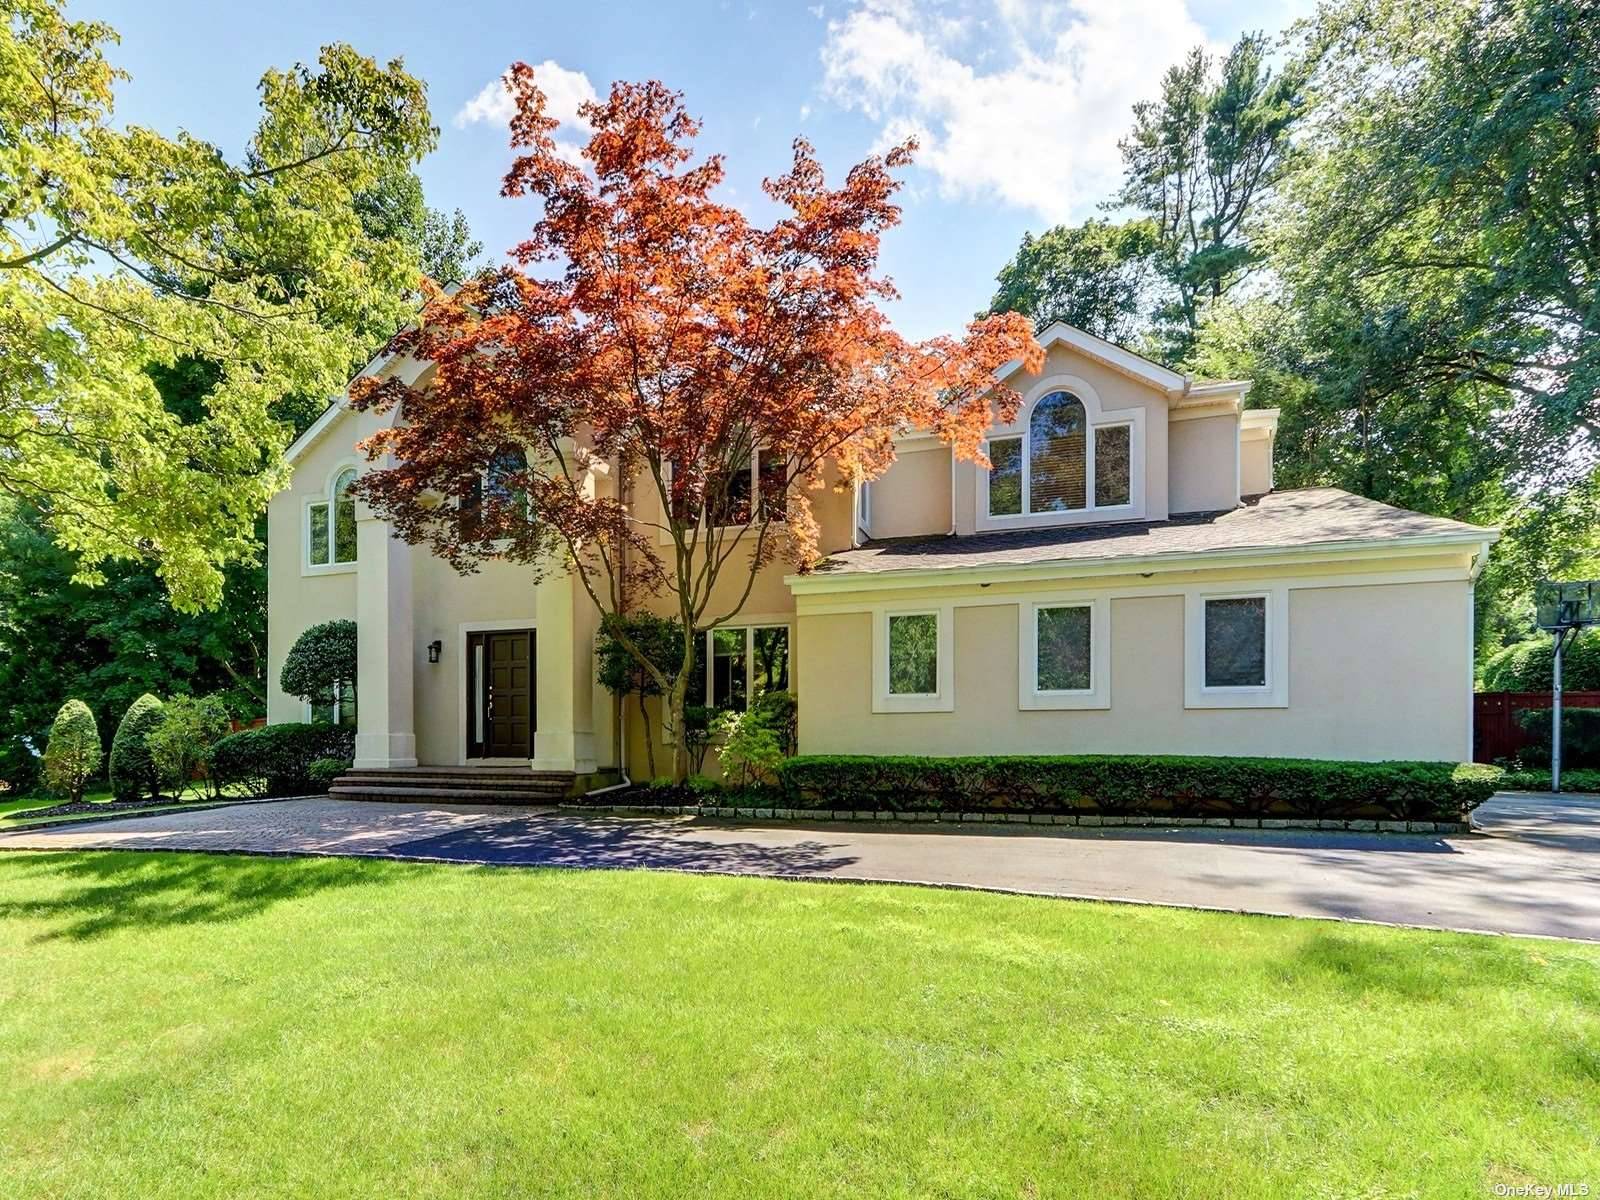 Welcome home to a spacious Center hall Colonial, a 6 bedroom, 3.